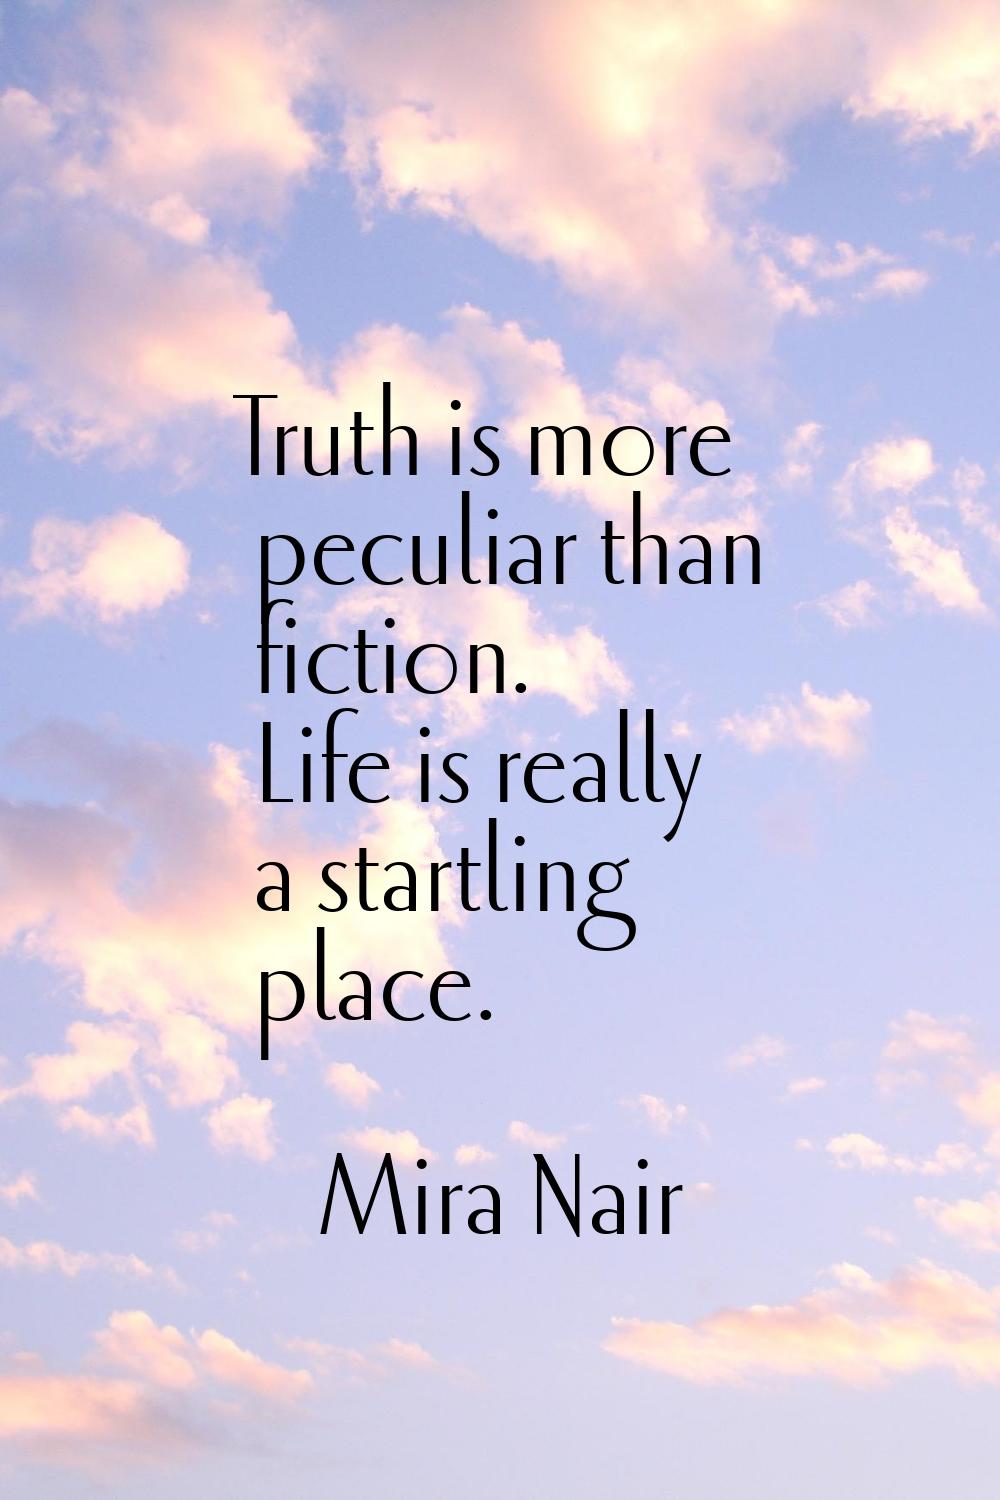 Truth is more peculiar than fiction. Life is really a startling place.